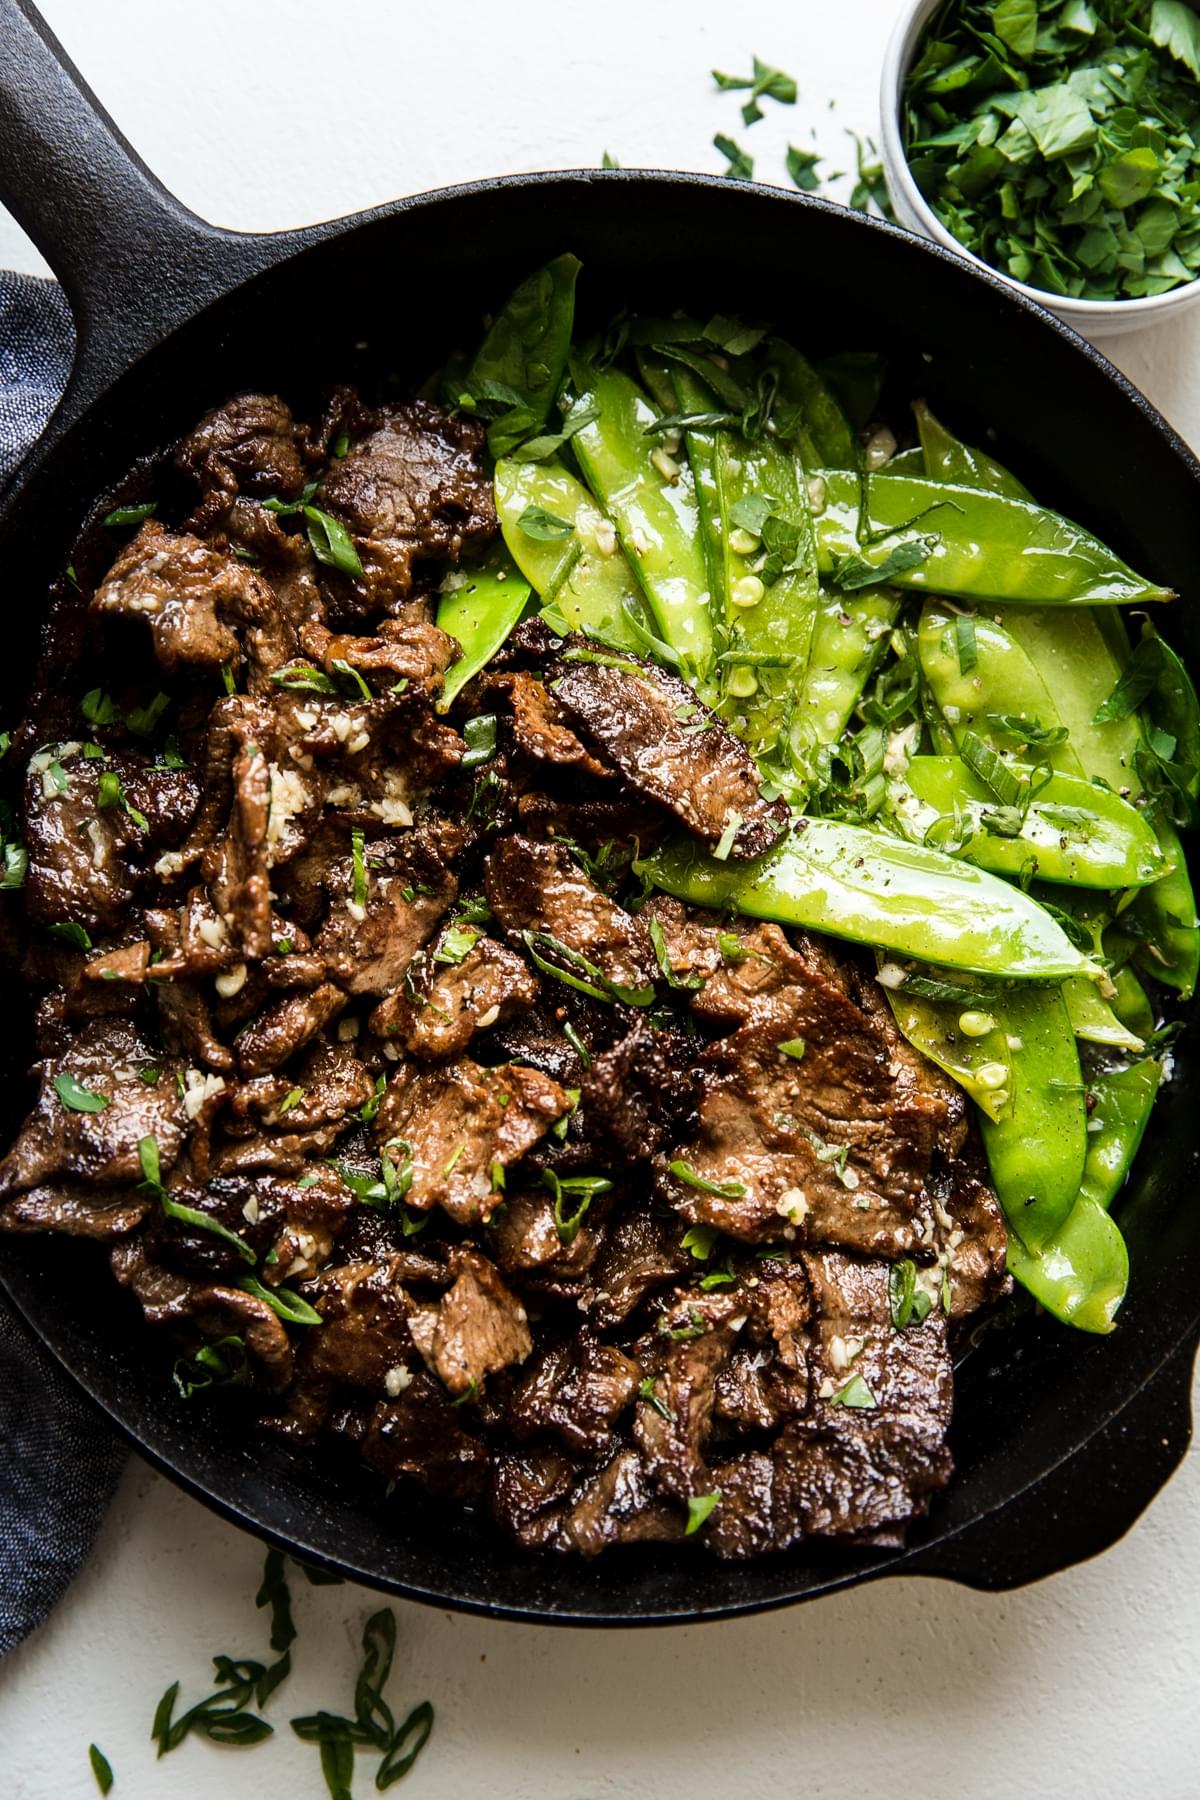 Steak And Snap Pea Garlic Butter Stir Fry with snow peas in a pan